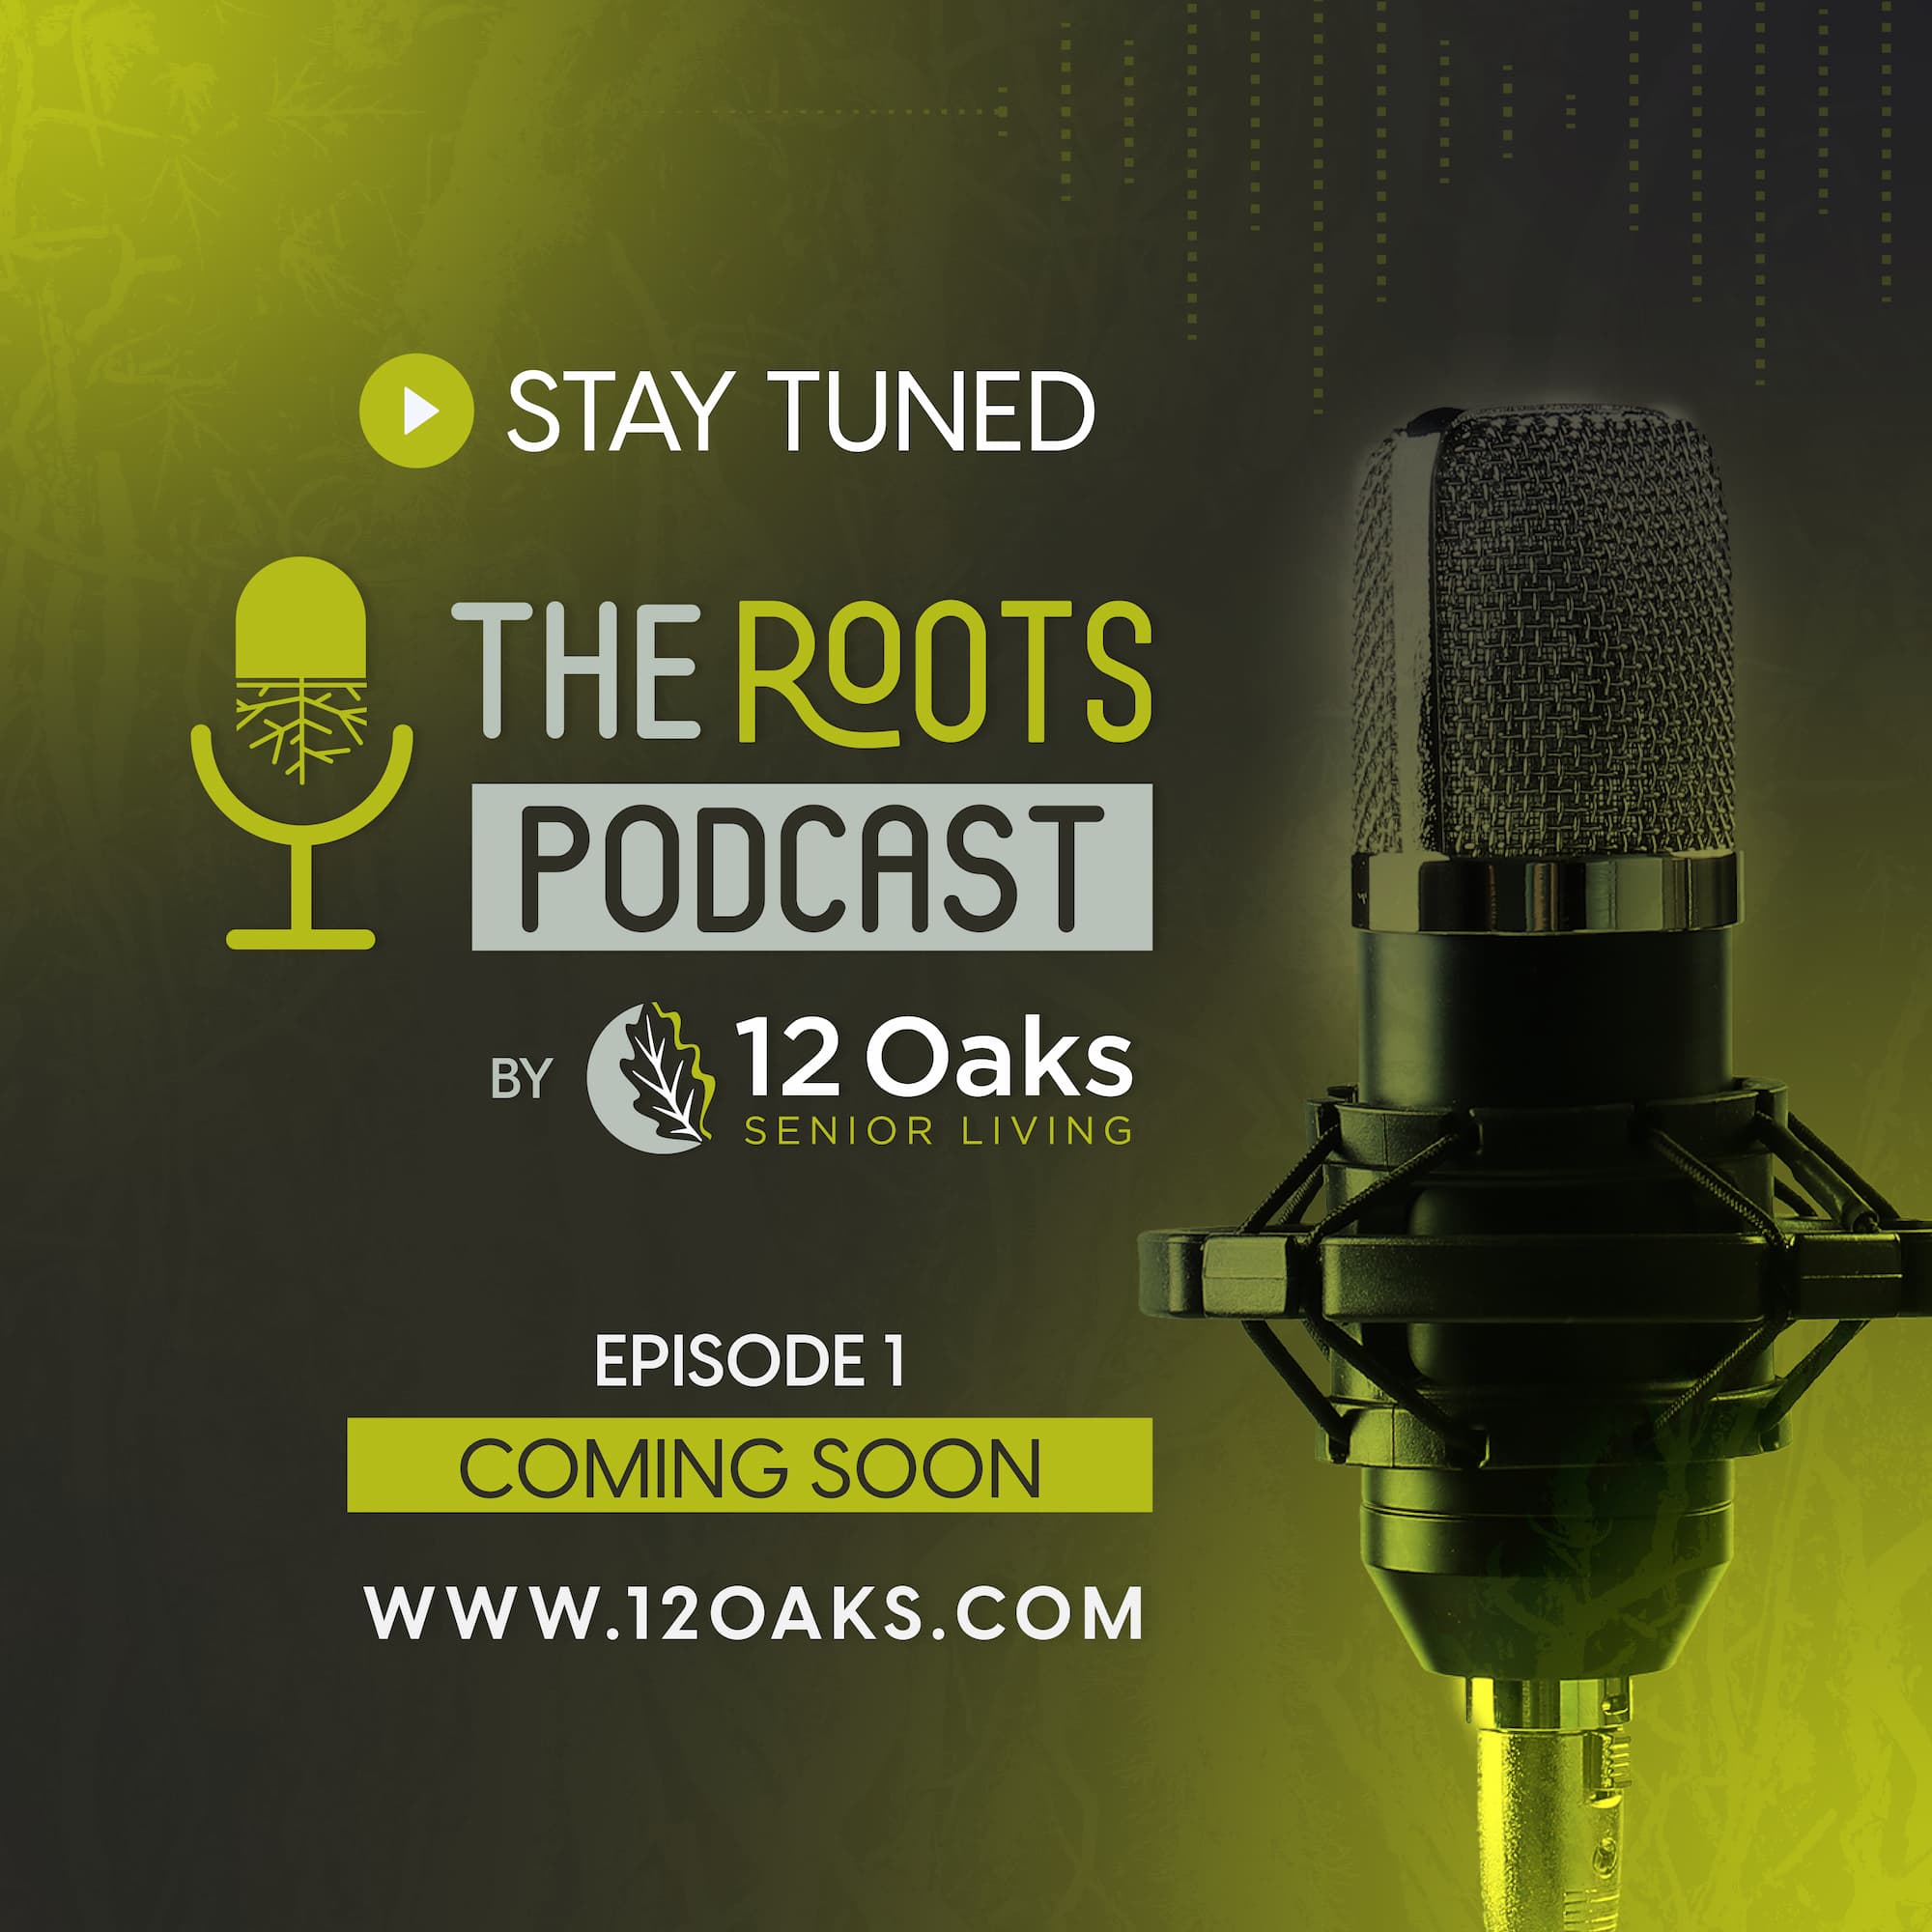 The Roots Podcast - coming soon!